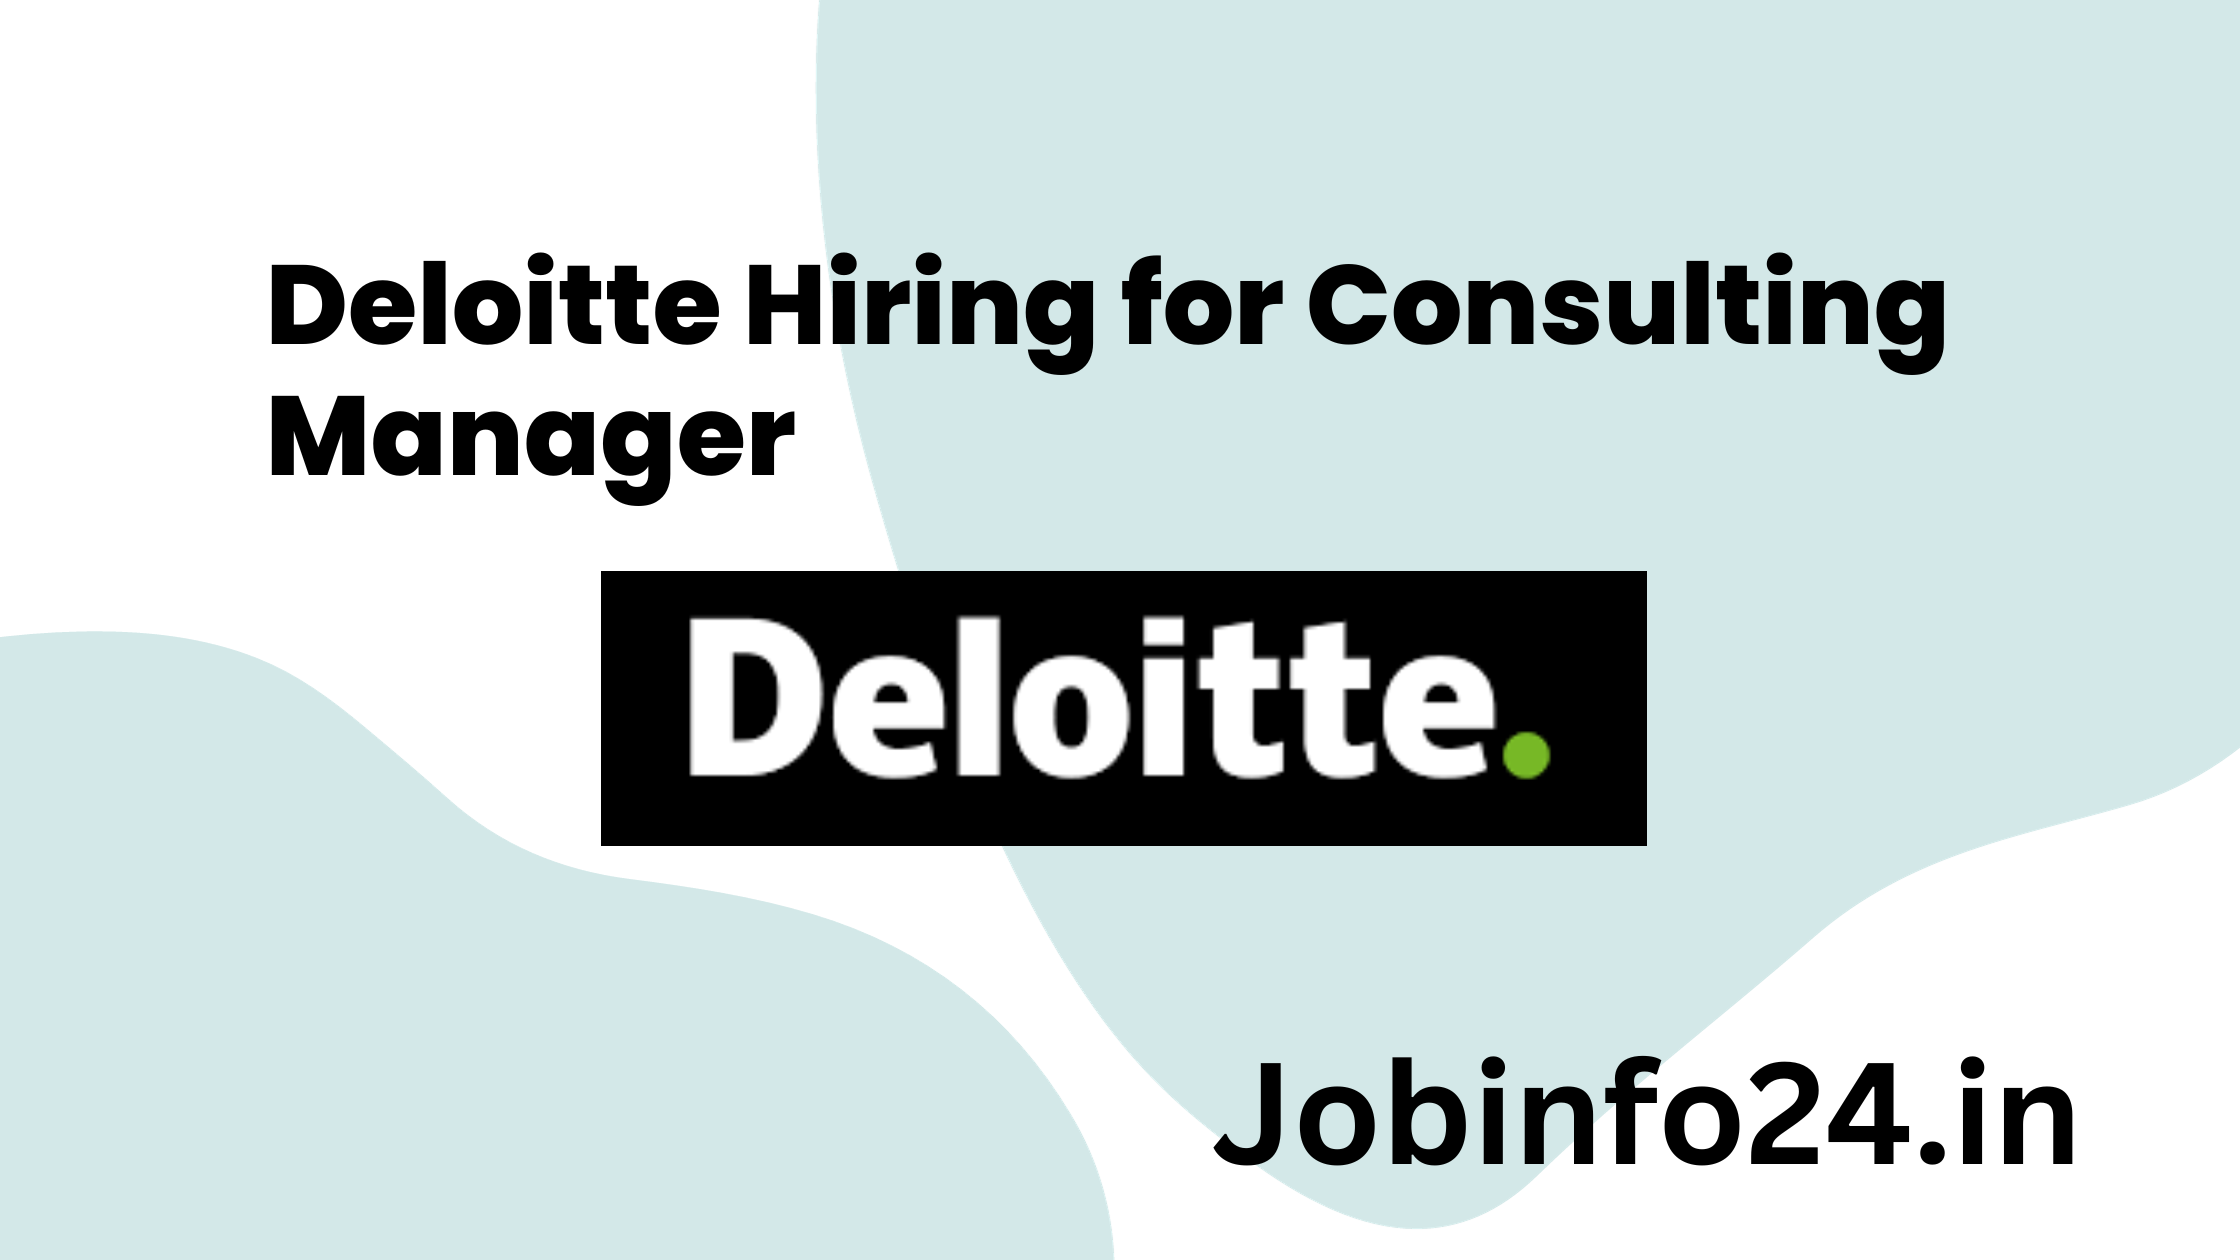 Deloitte Hiring for Consulting Manager